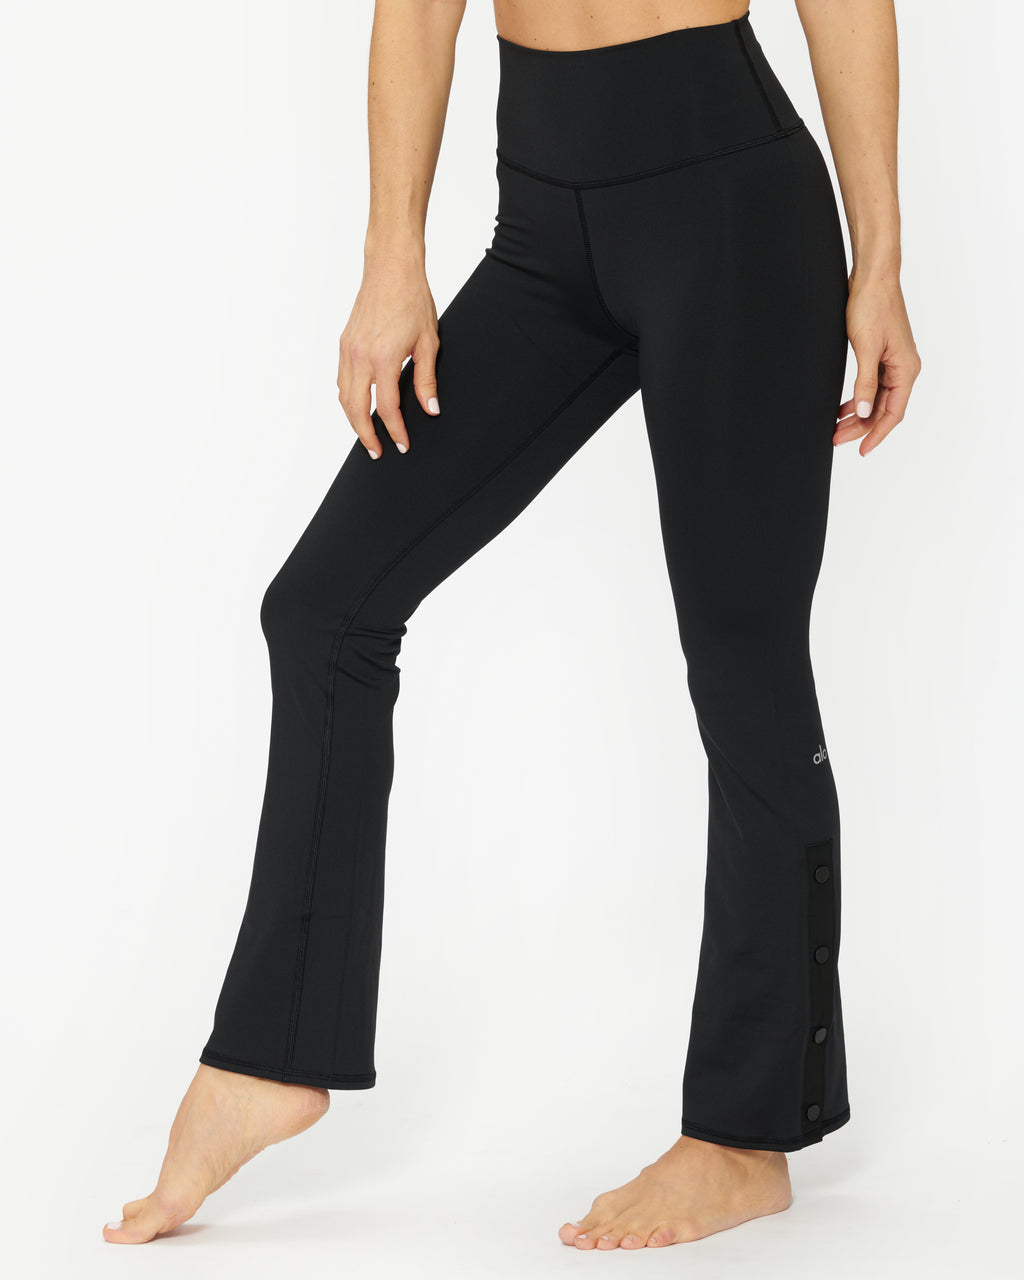 Alo Yoga Airlift Gamechanger High-Waisted 7/8 Legging – The Shop at Equinox